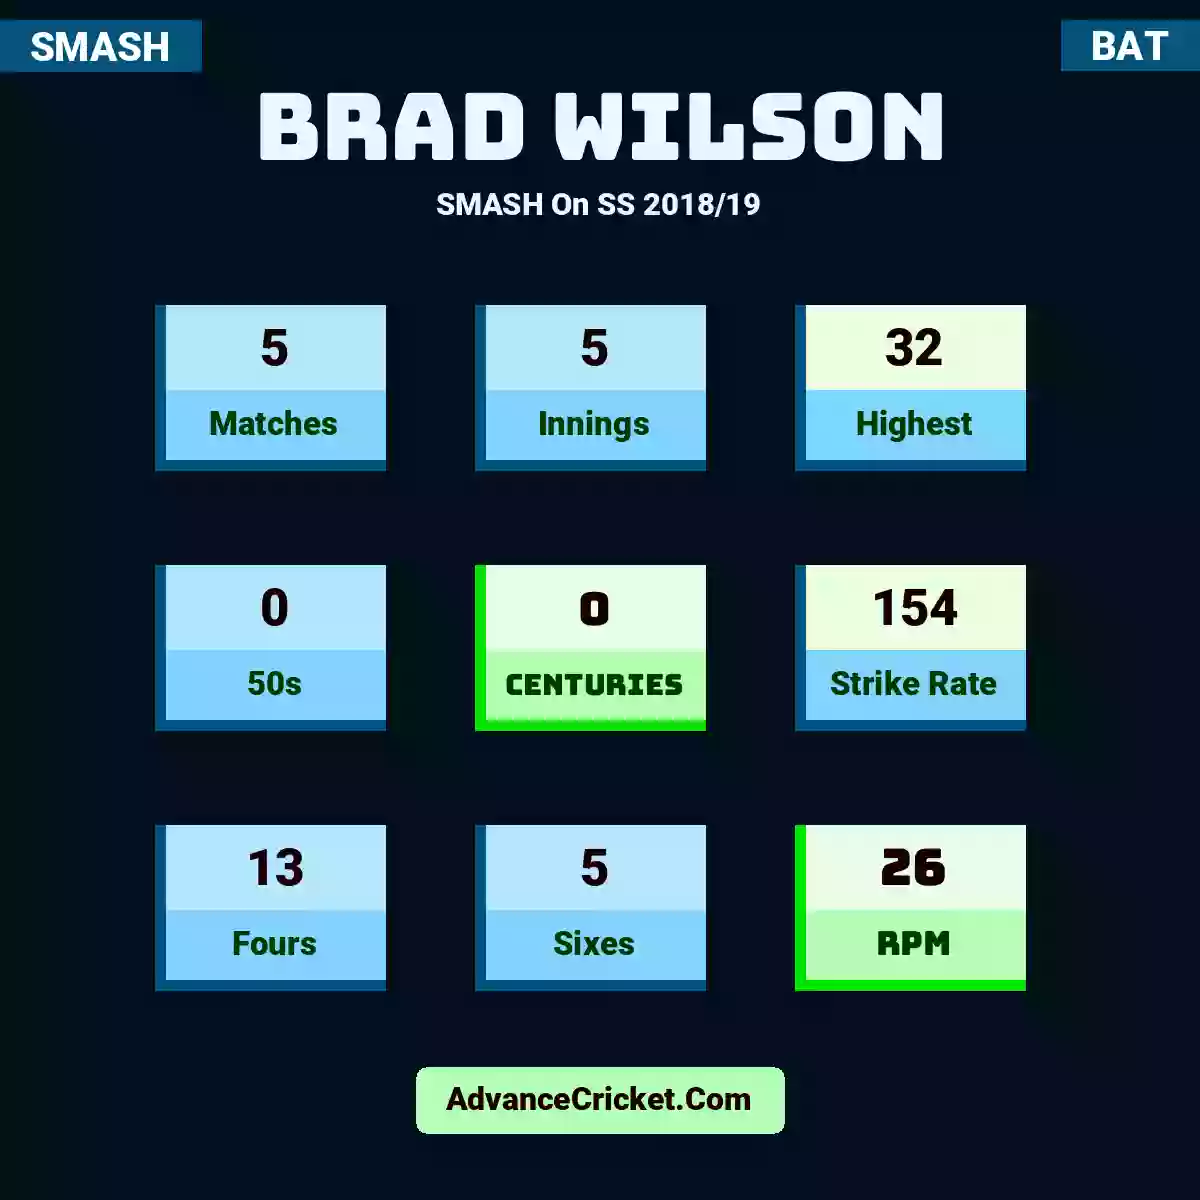 Brad Wilson SMASH  On SS 2018/19, Brad Wilson played 5 matches, scored 32 runs as highest, 0 half-centuries, and 0 centuries, with a strike rate of 154. B.Wilson hit 13 fours and 5 sixes, with an RPM of 26.